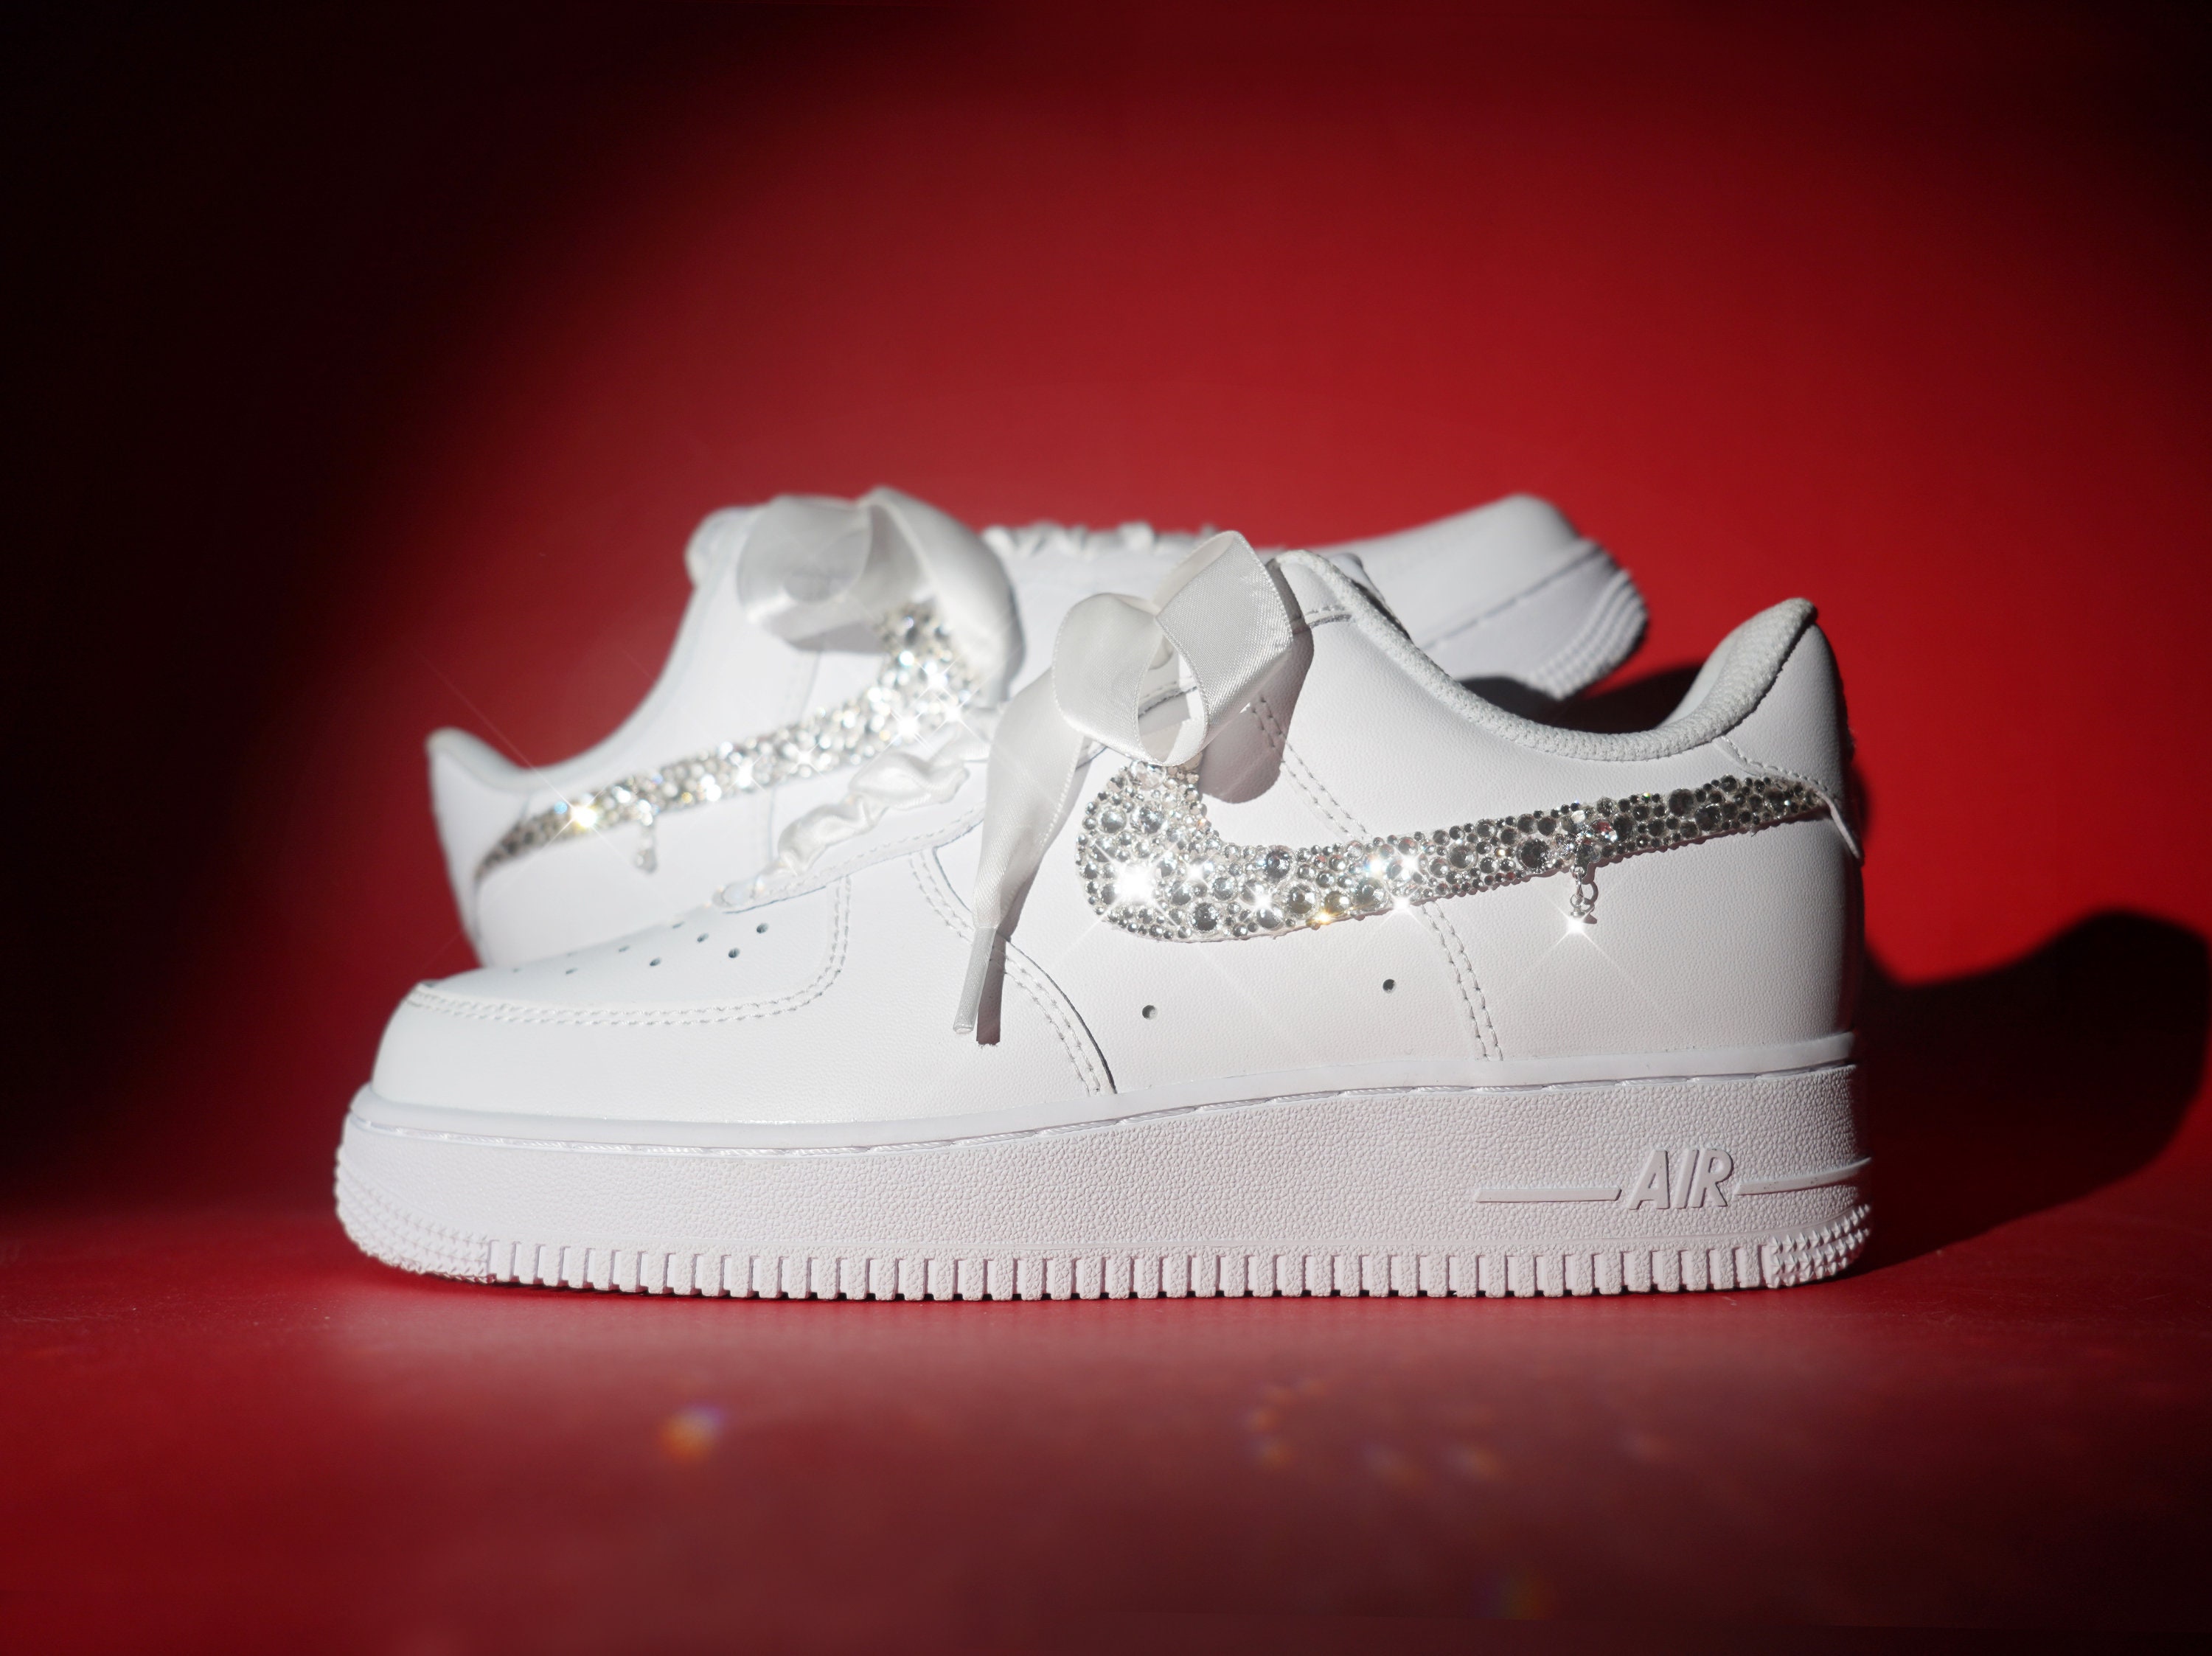 Custom Nike Air Force 1s With Crystals, Hand Placed Crystals, Crystalized,  Bedazzled, Gems, Rhinestone, Rhinestones 